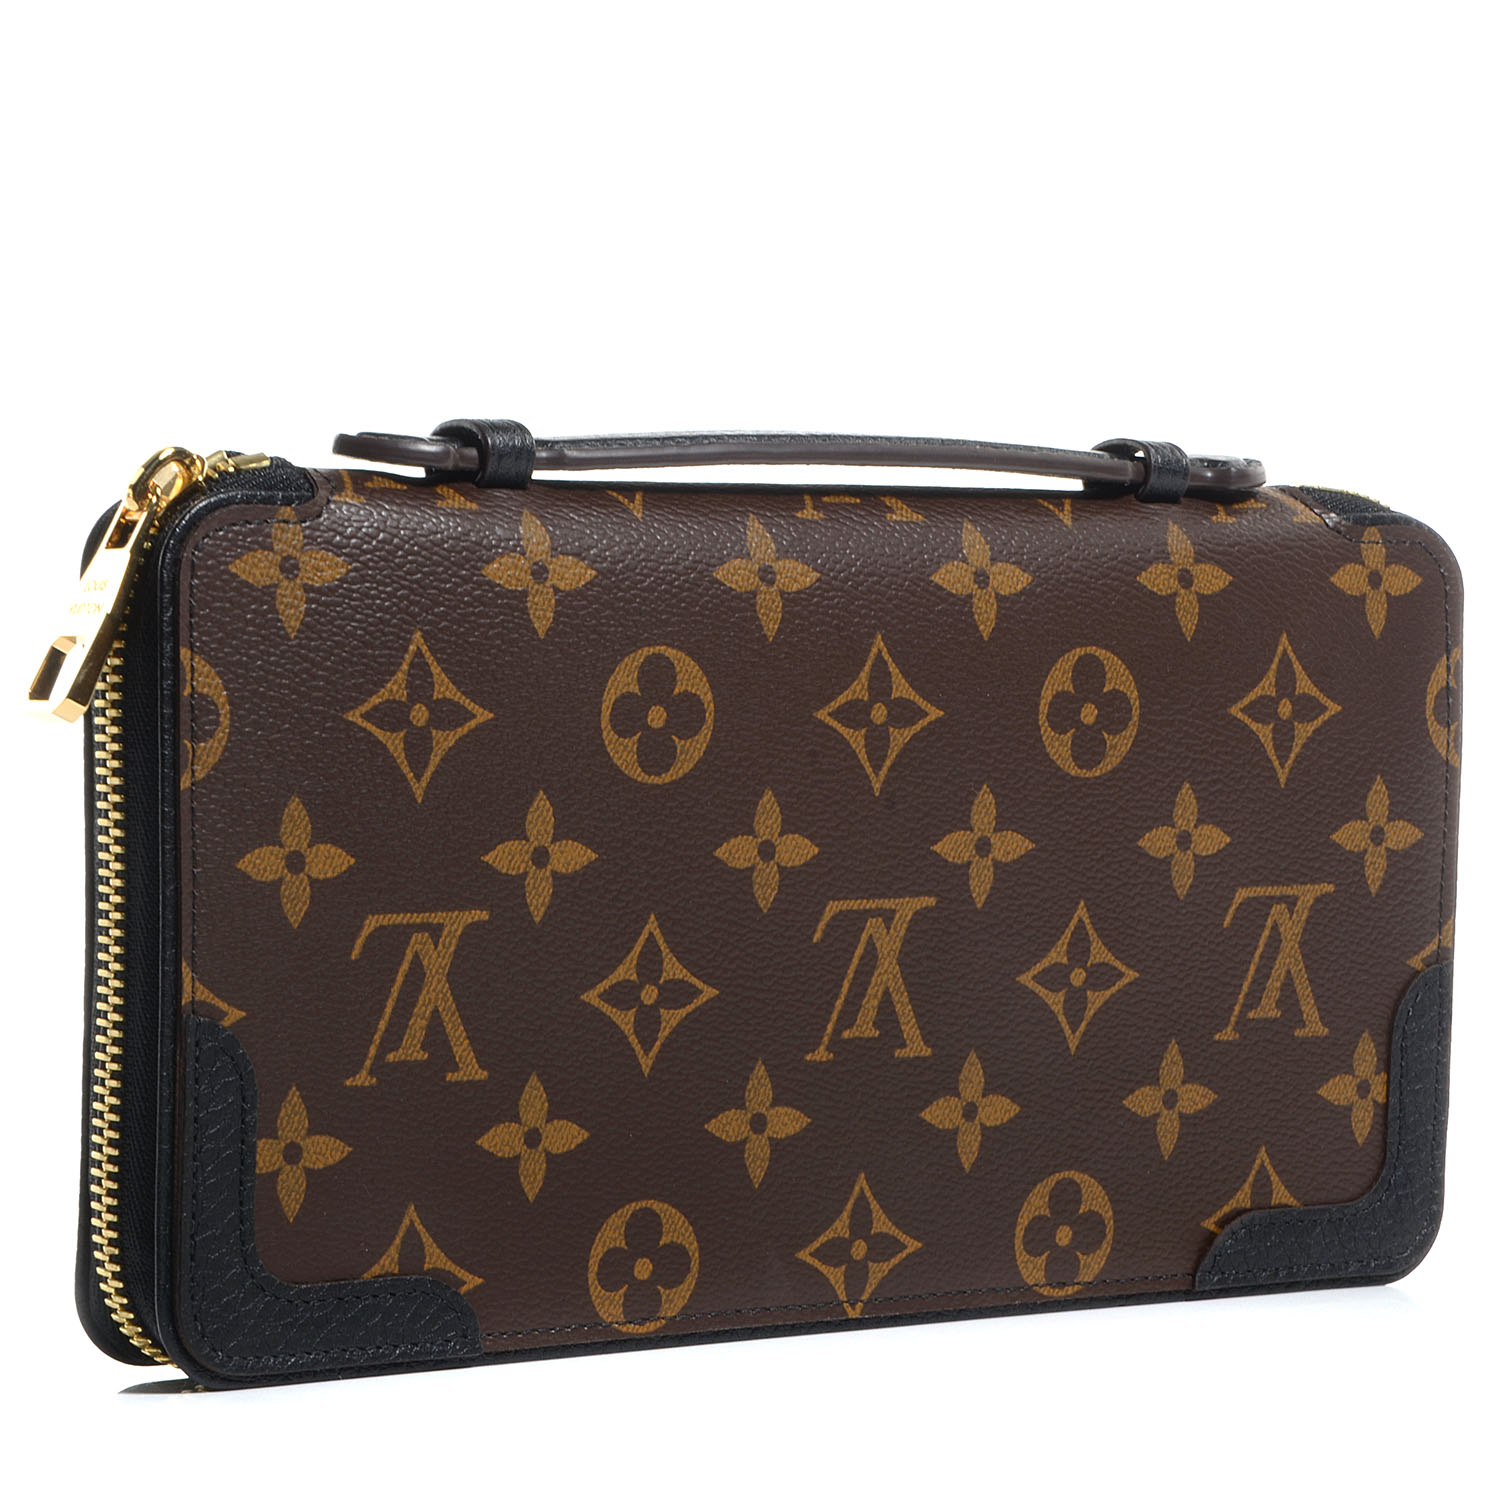 Daily Pouch - Luxury All Luggage and Accessories - Travel, Women M62937